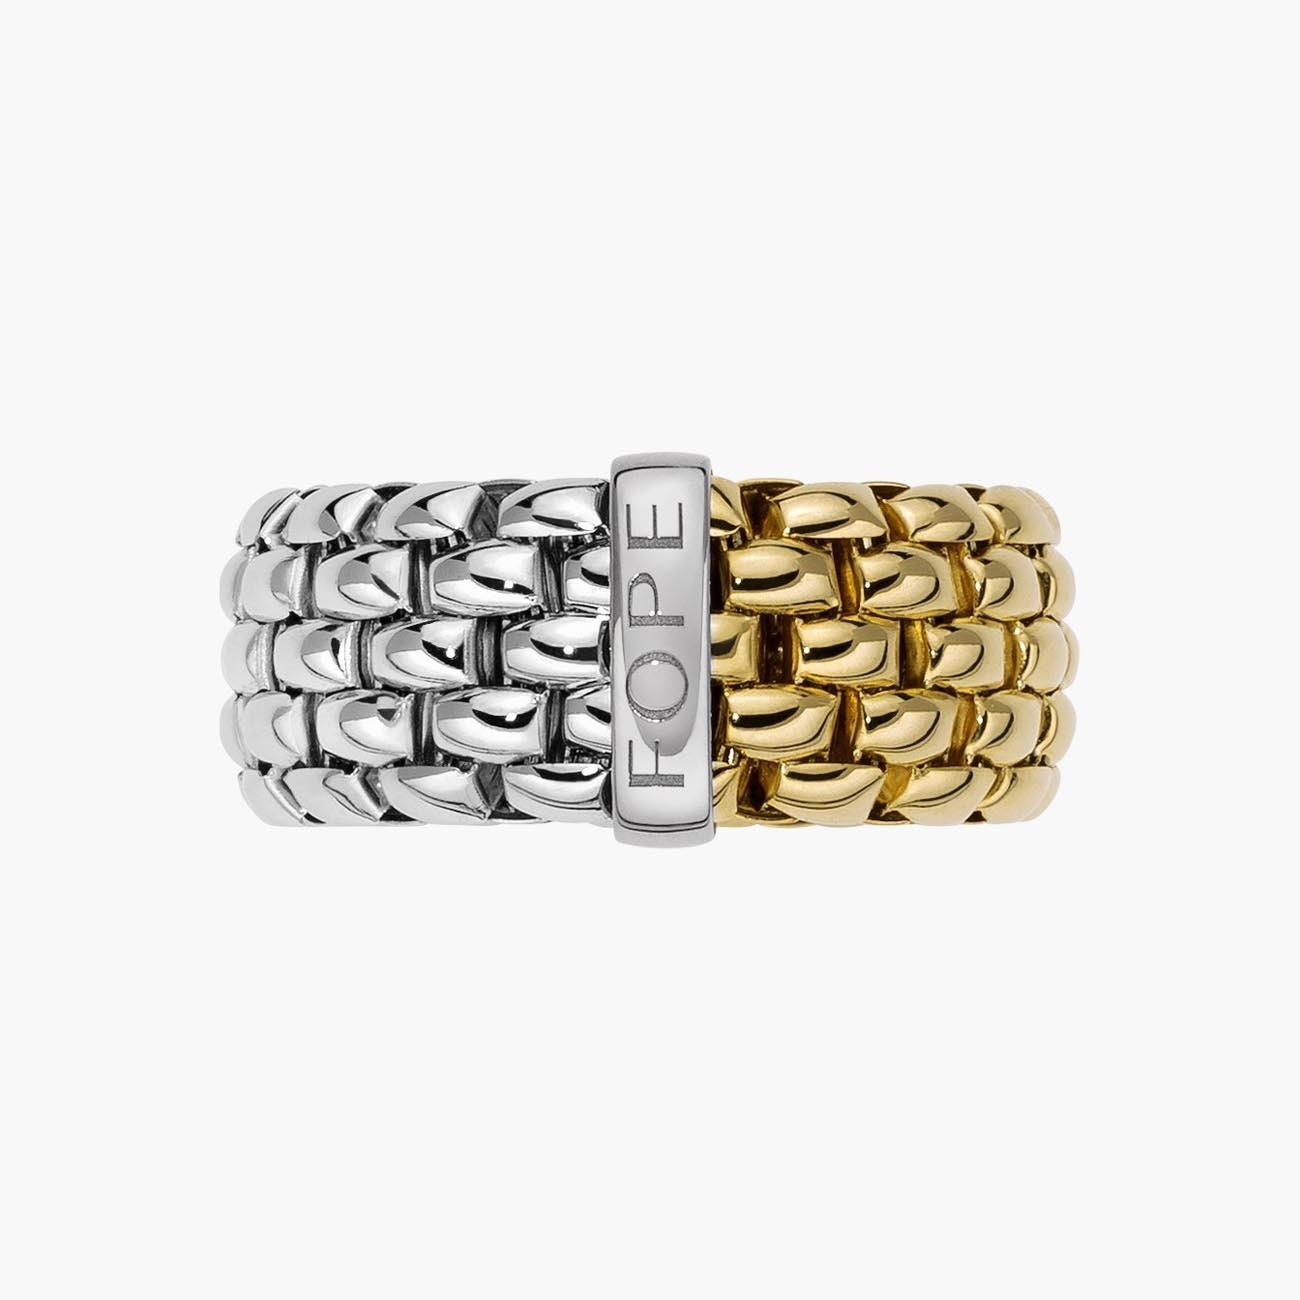 Fope Essentials Ring in White and Yellow Gold Front Medium Width